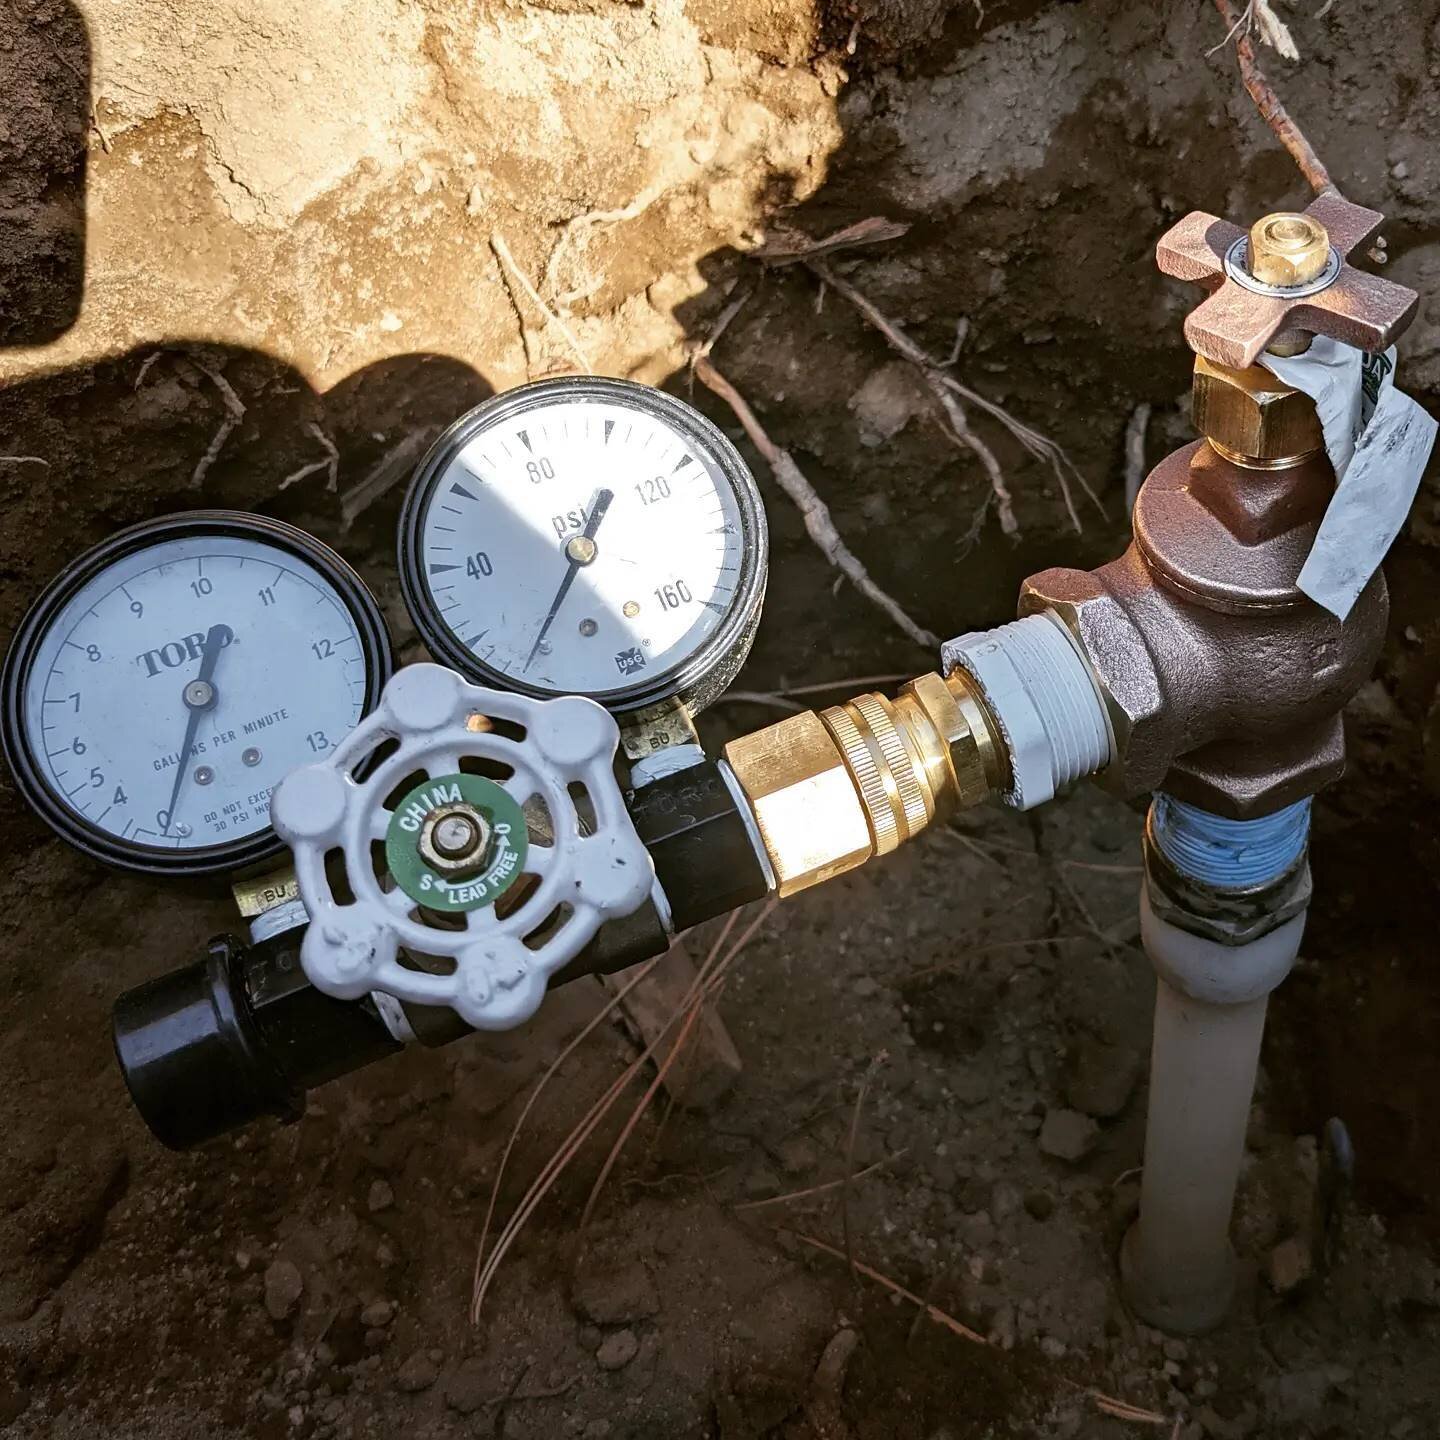 You can't manage it if you don't measure it! I've got the right info now to design the irrigation #waterwhysirrigation #waterwhys #pointofconnection #flowgauge #irrigationdesign